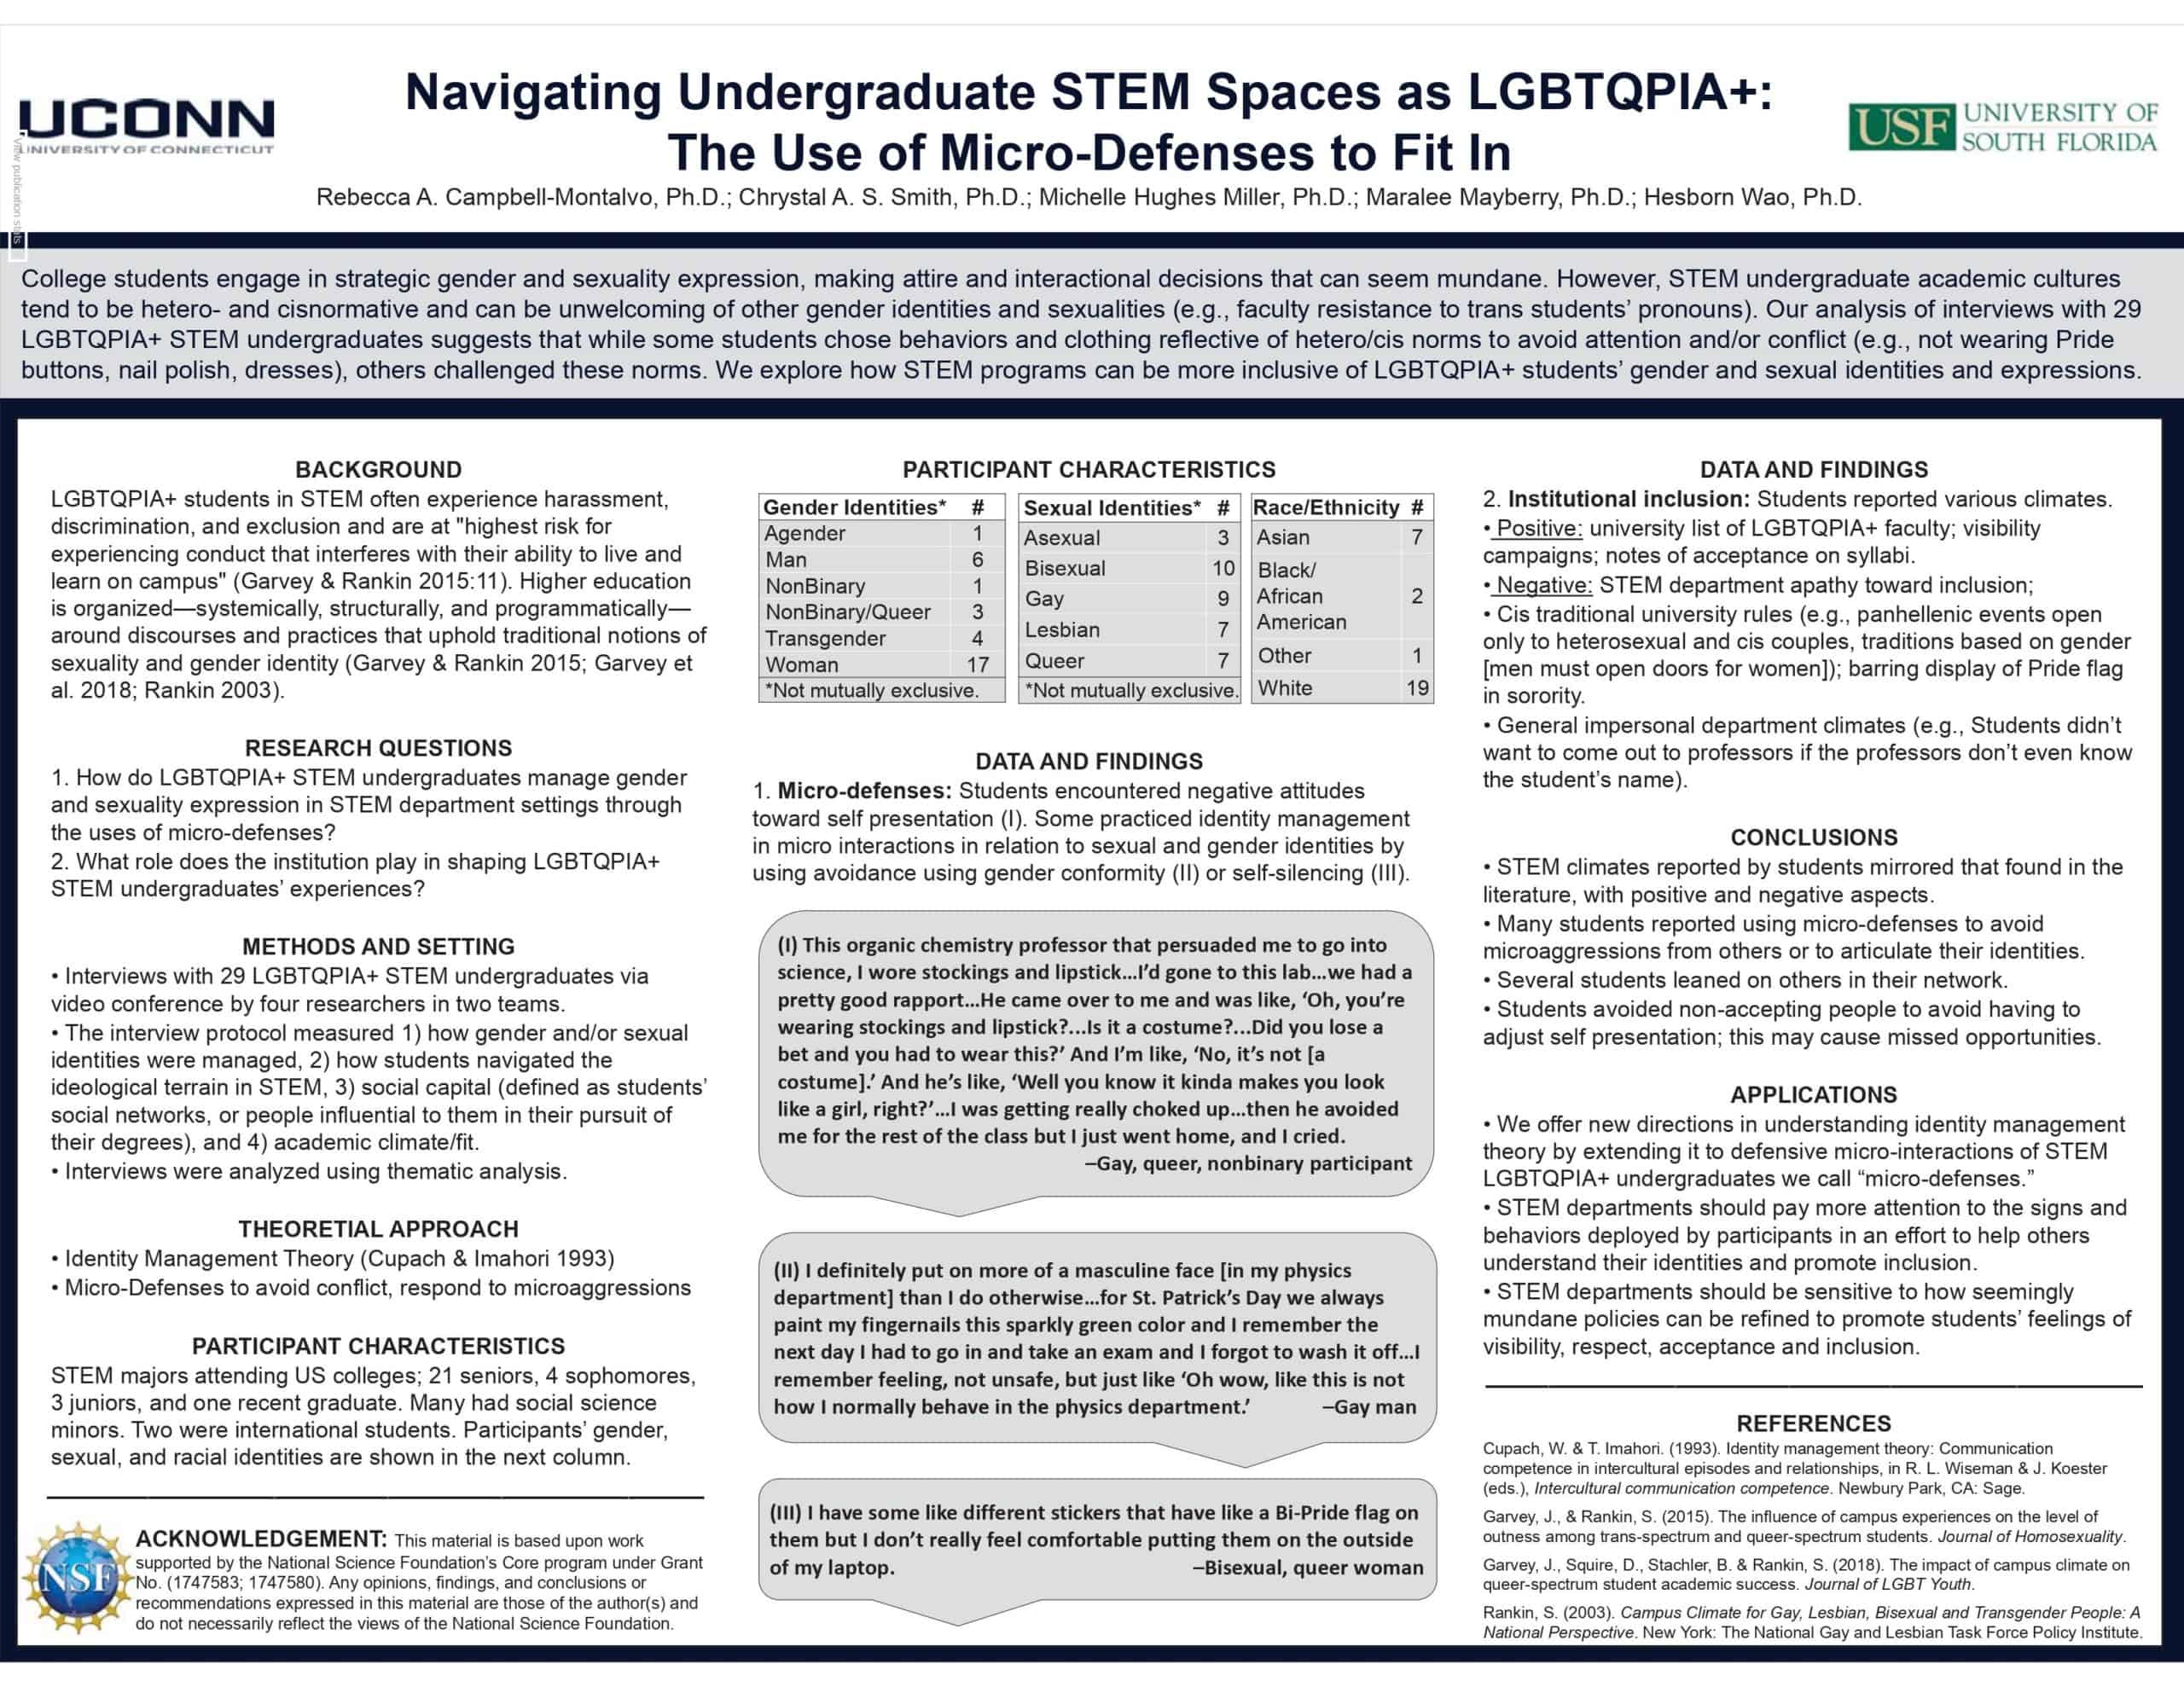 Swe Research: Impact Of Stem Academic Culture And Social Networks Of Lgbtq+ Undergraduate Students